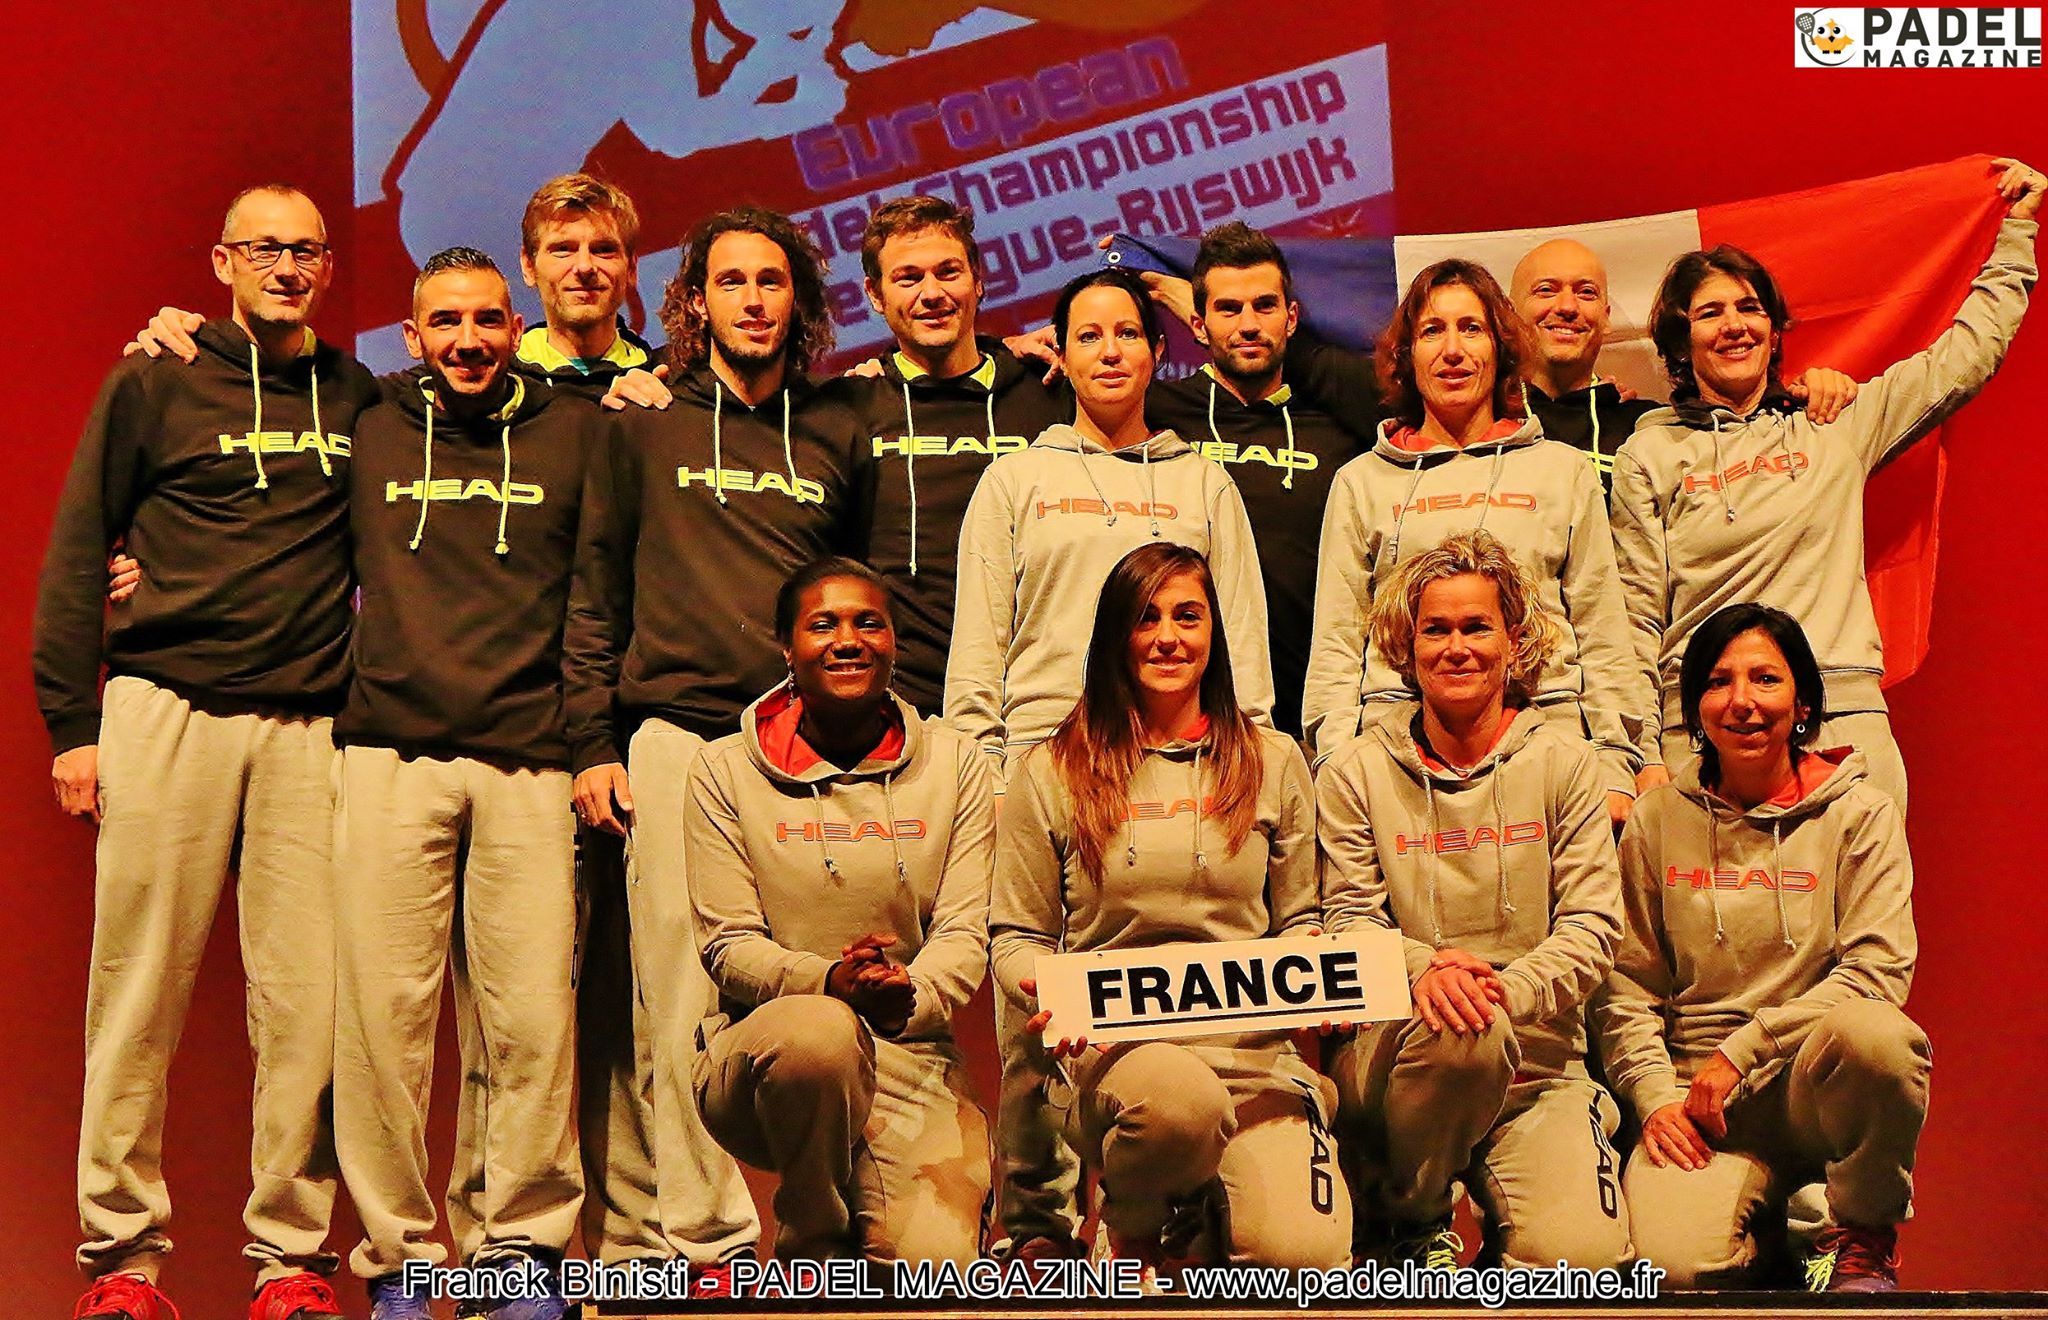 Will France have to go through the qualifiers of the world championships?